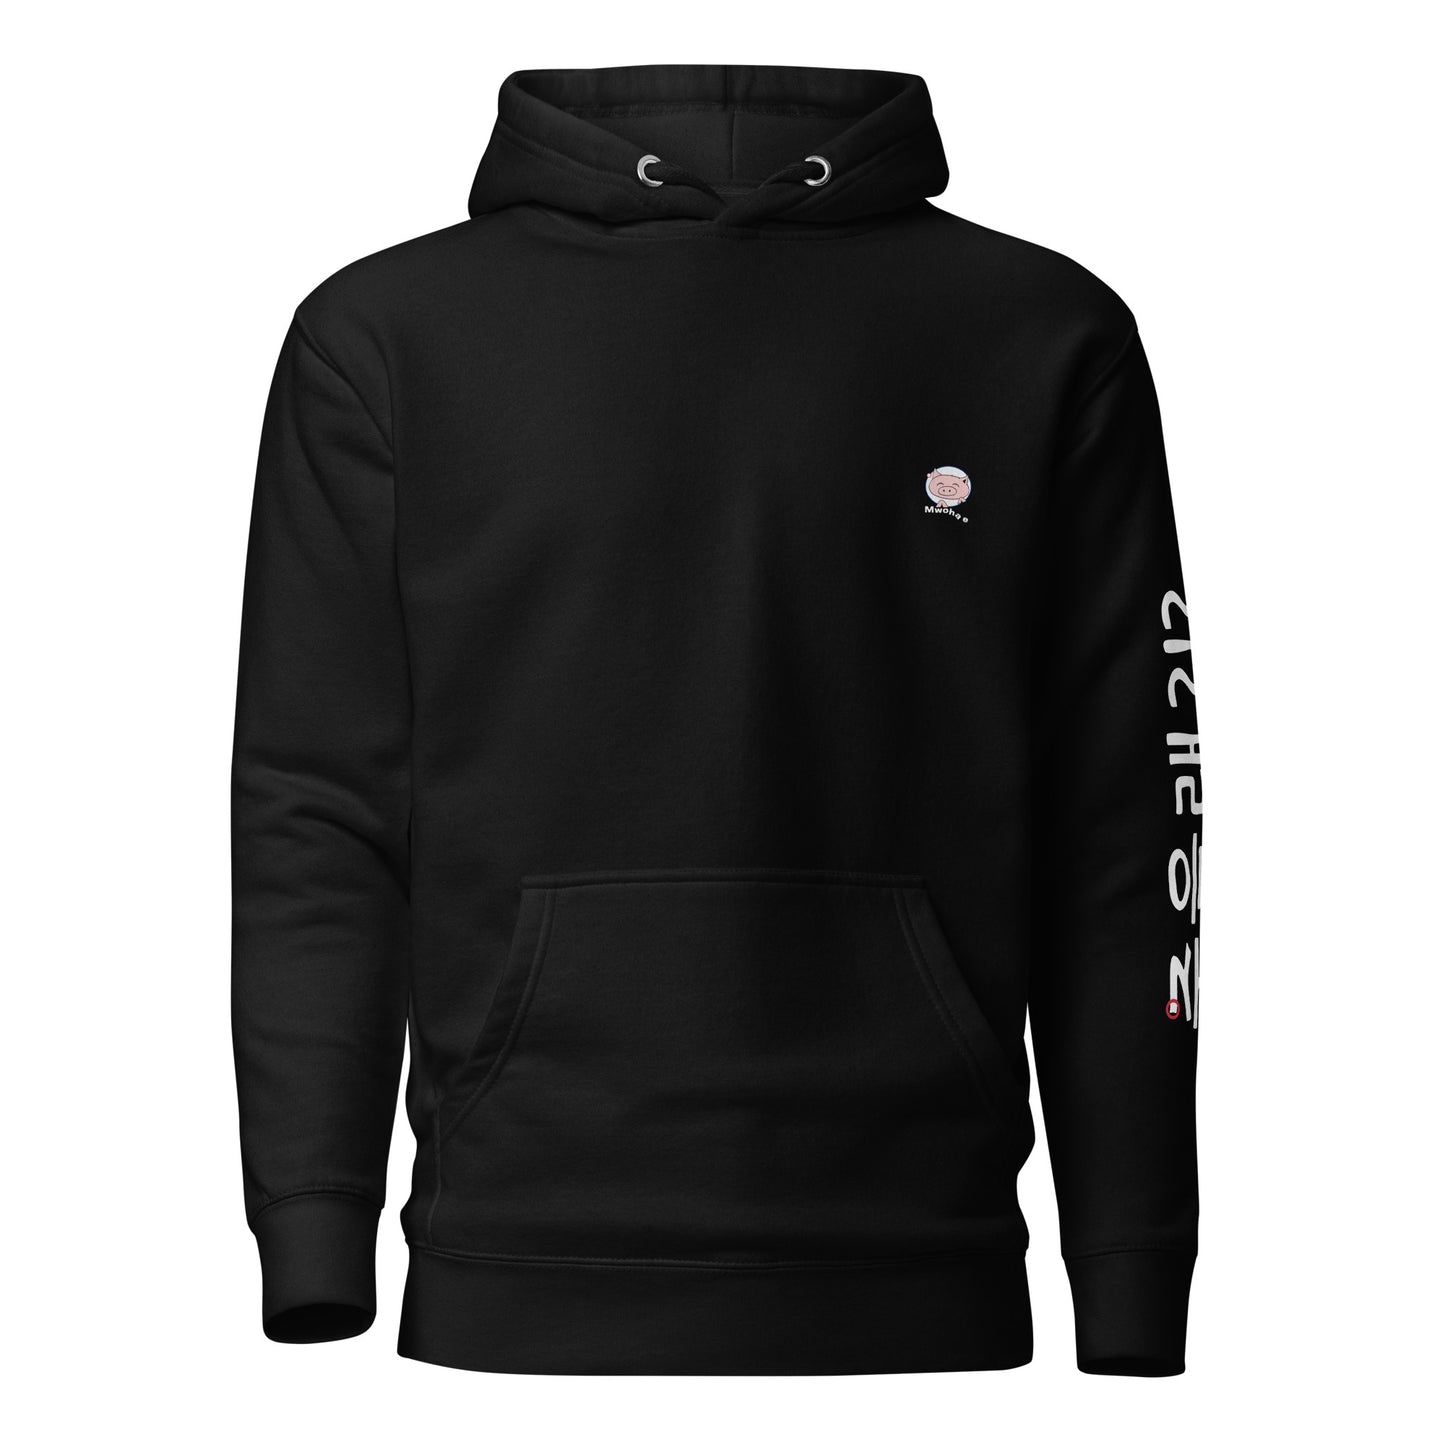 Black premium hoodie with small Mwohae logo on the left chest